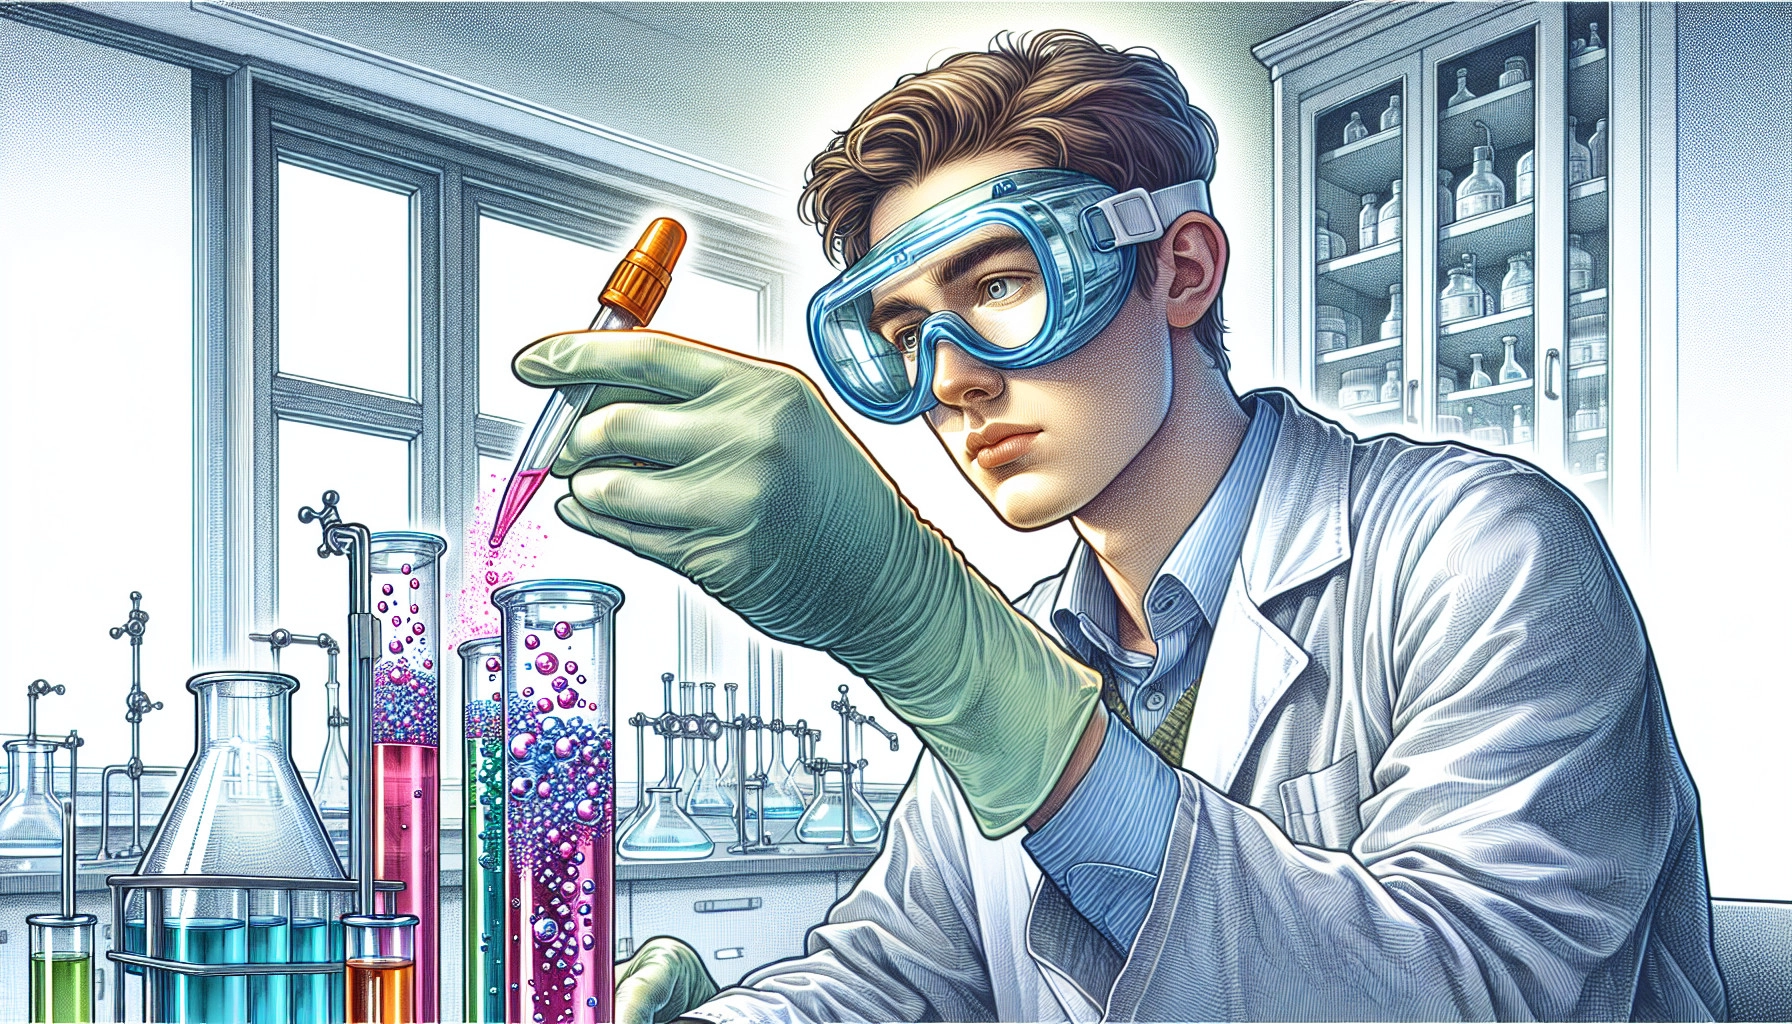 Illustration Of A Person Wearing Safety Goggles And Gloves While Handling Chemicals